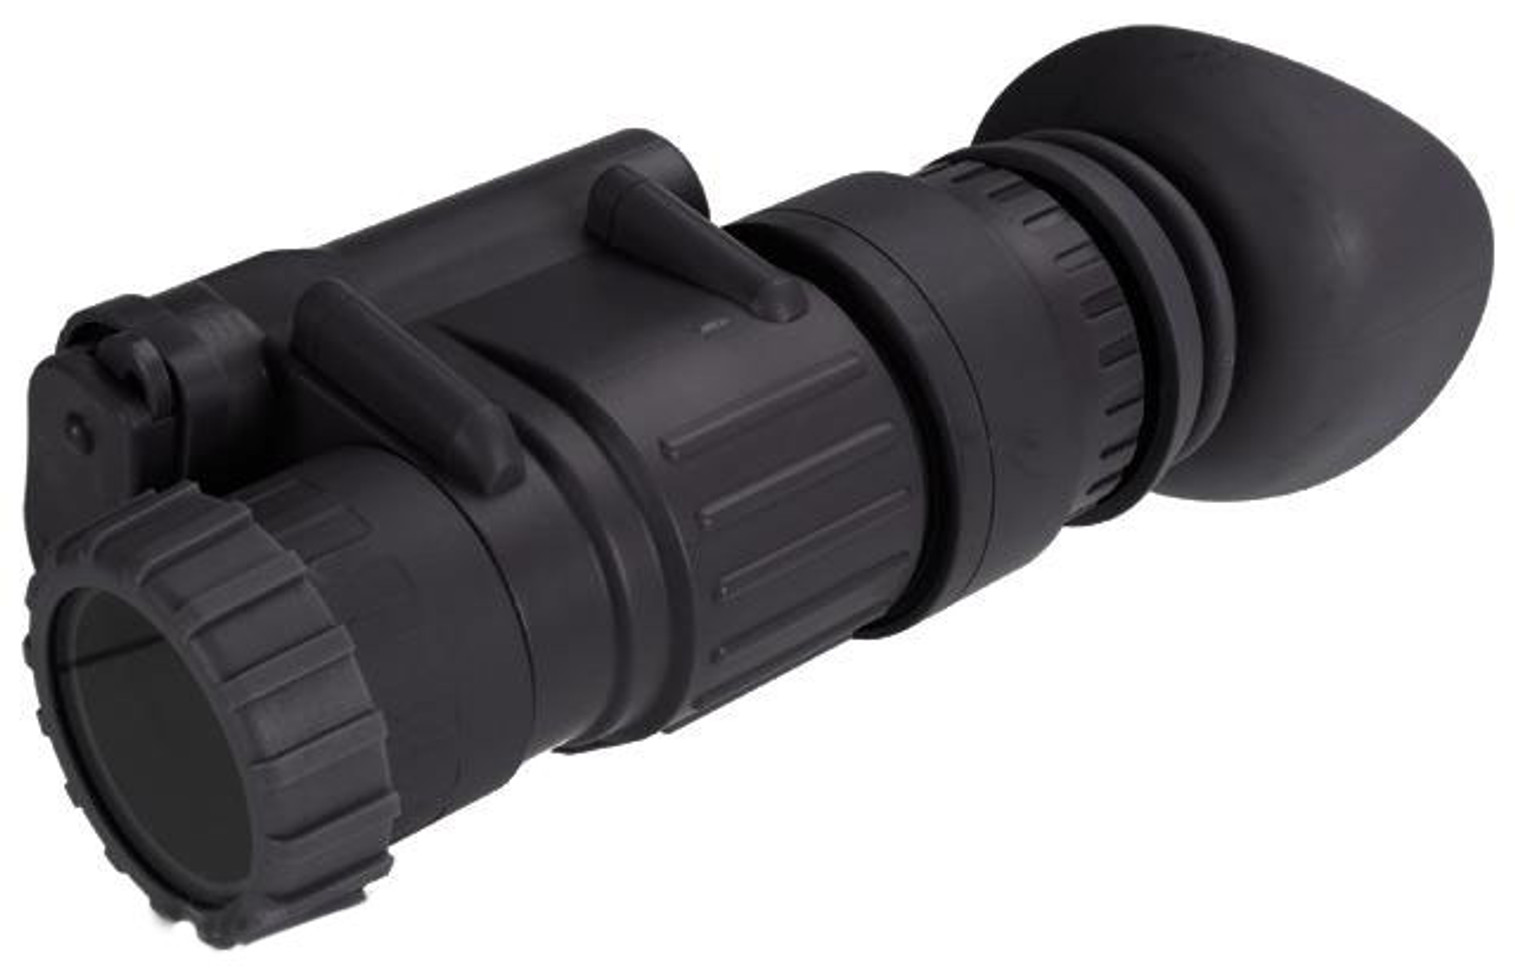 Replica Dummy AN/PVS-14 Monocular Night Vision (For Movie Prop, Cosplay, Decorative) - (Black)